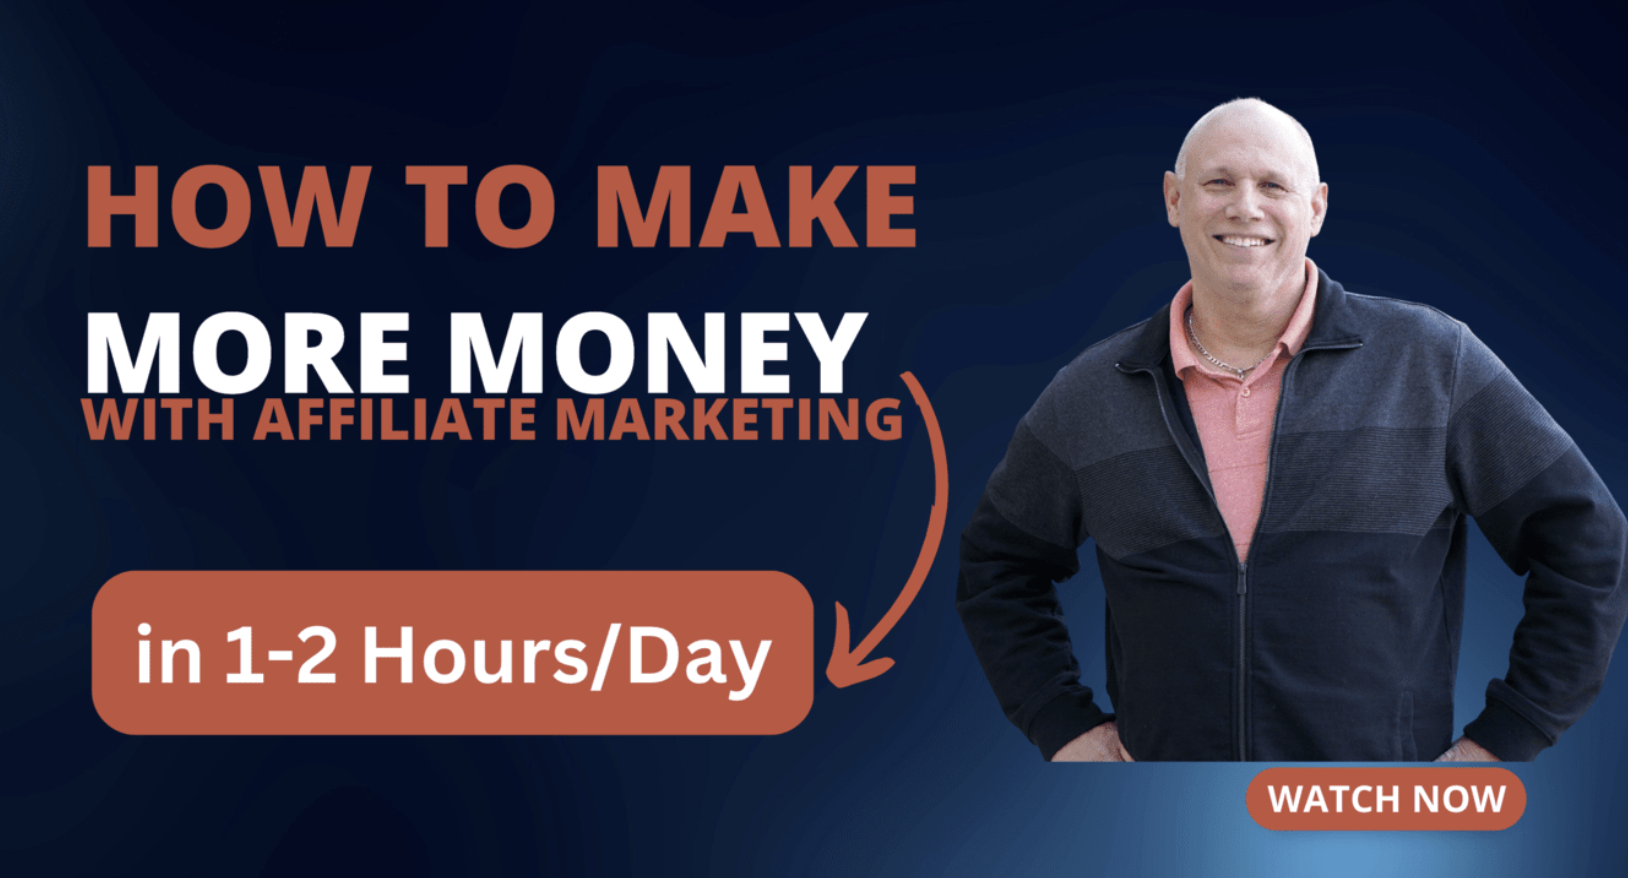 How To Be More Successful With Affiliate Marketing When You're Short On Time